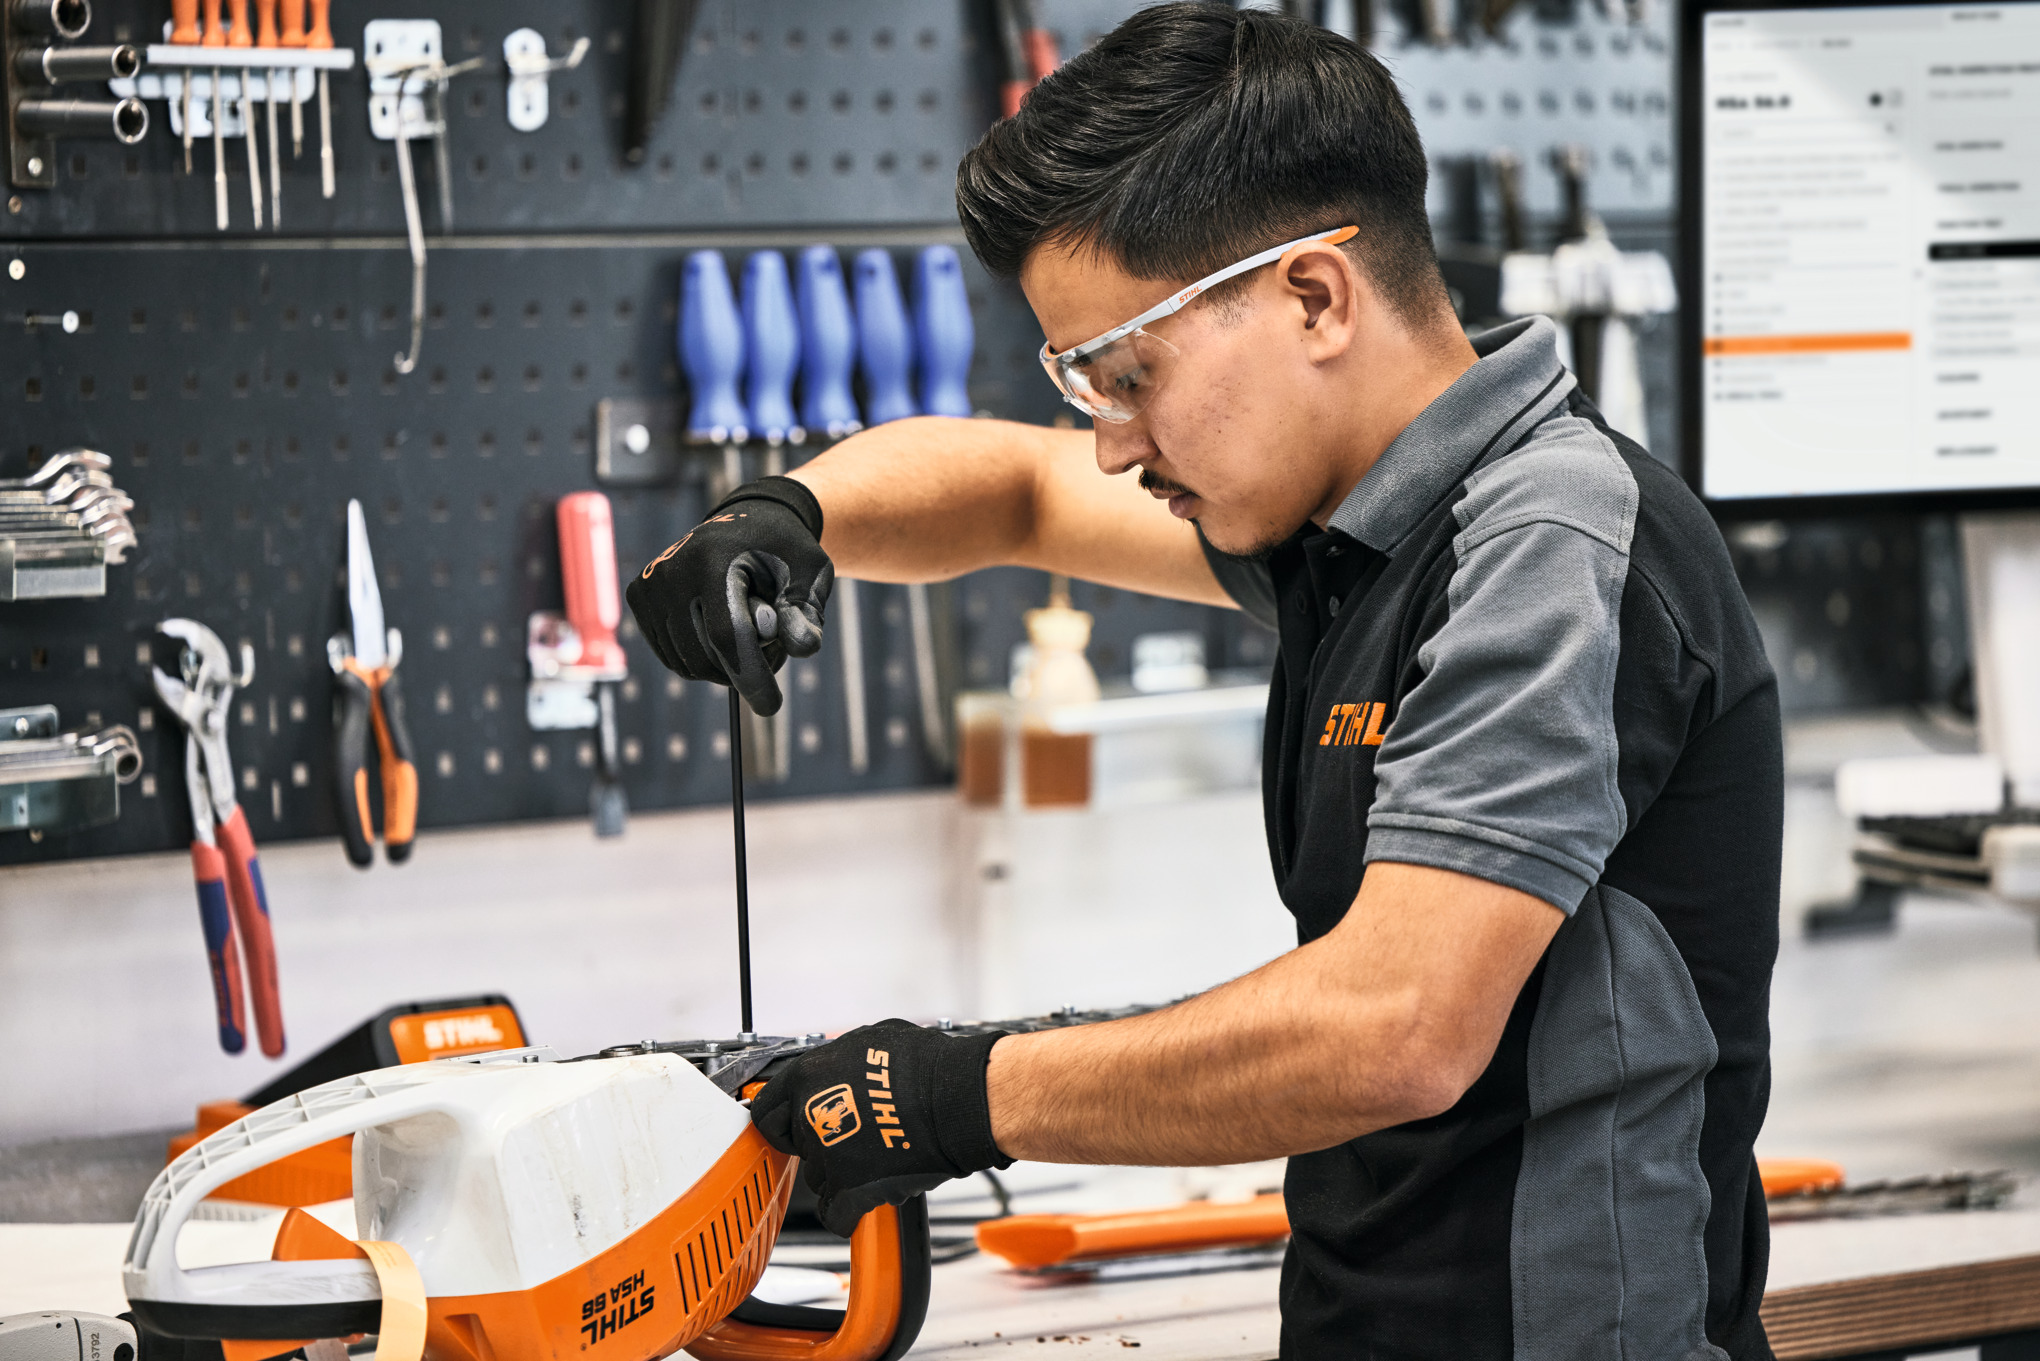 A man performing maintenance work on a STIHL hedge trimmer in the workshop